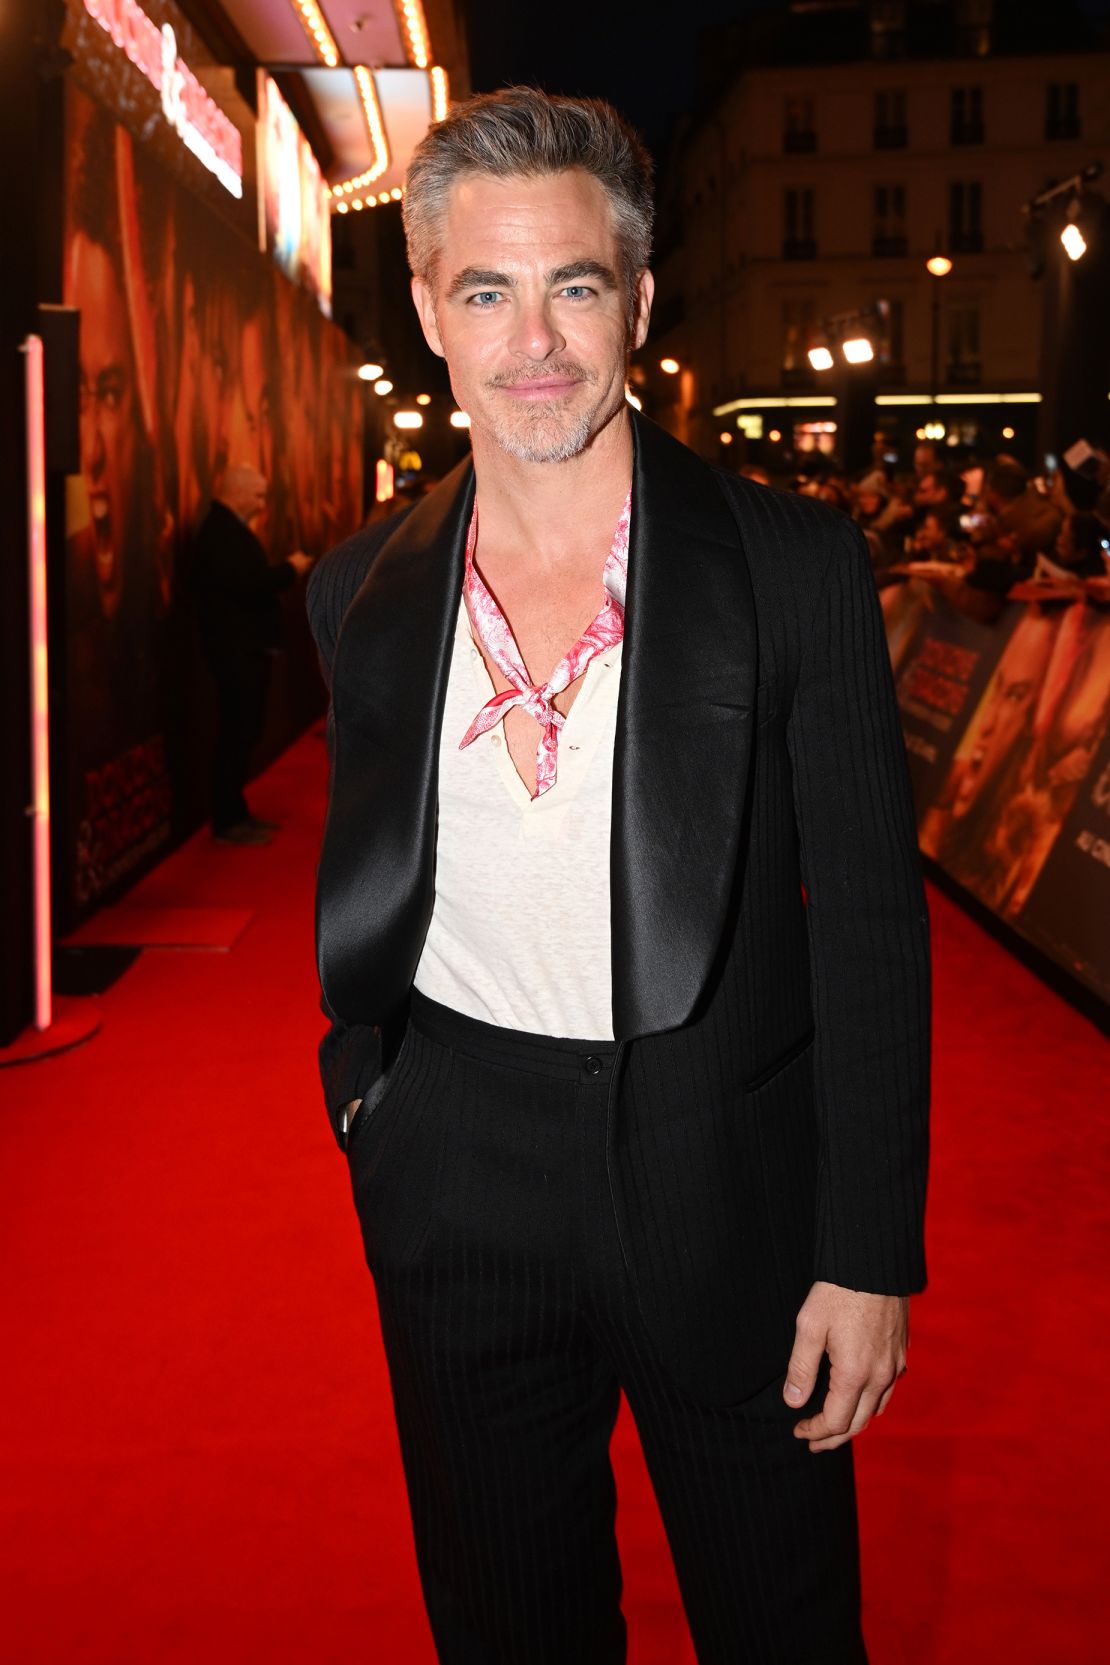 At a "Dungeons & Dragons" movie premiere in Paris on March 22, 2023, Pine paired a tuxedo jacket with a deep V-neck tee and silk scarf.